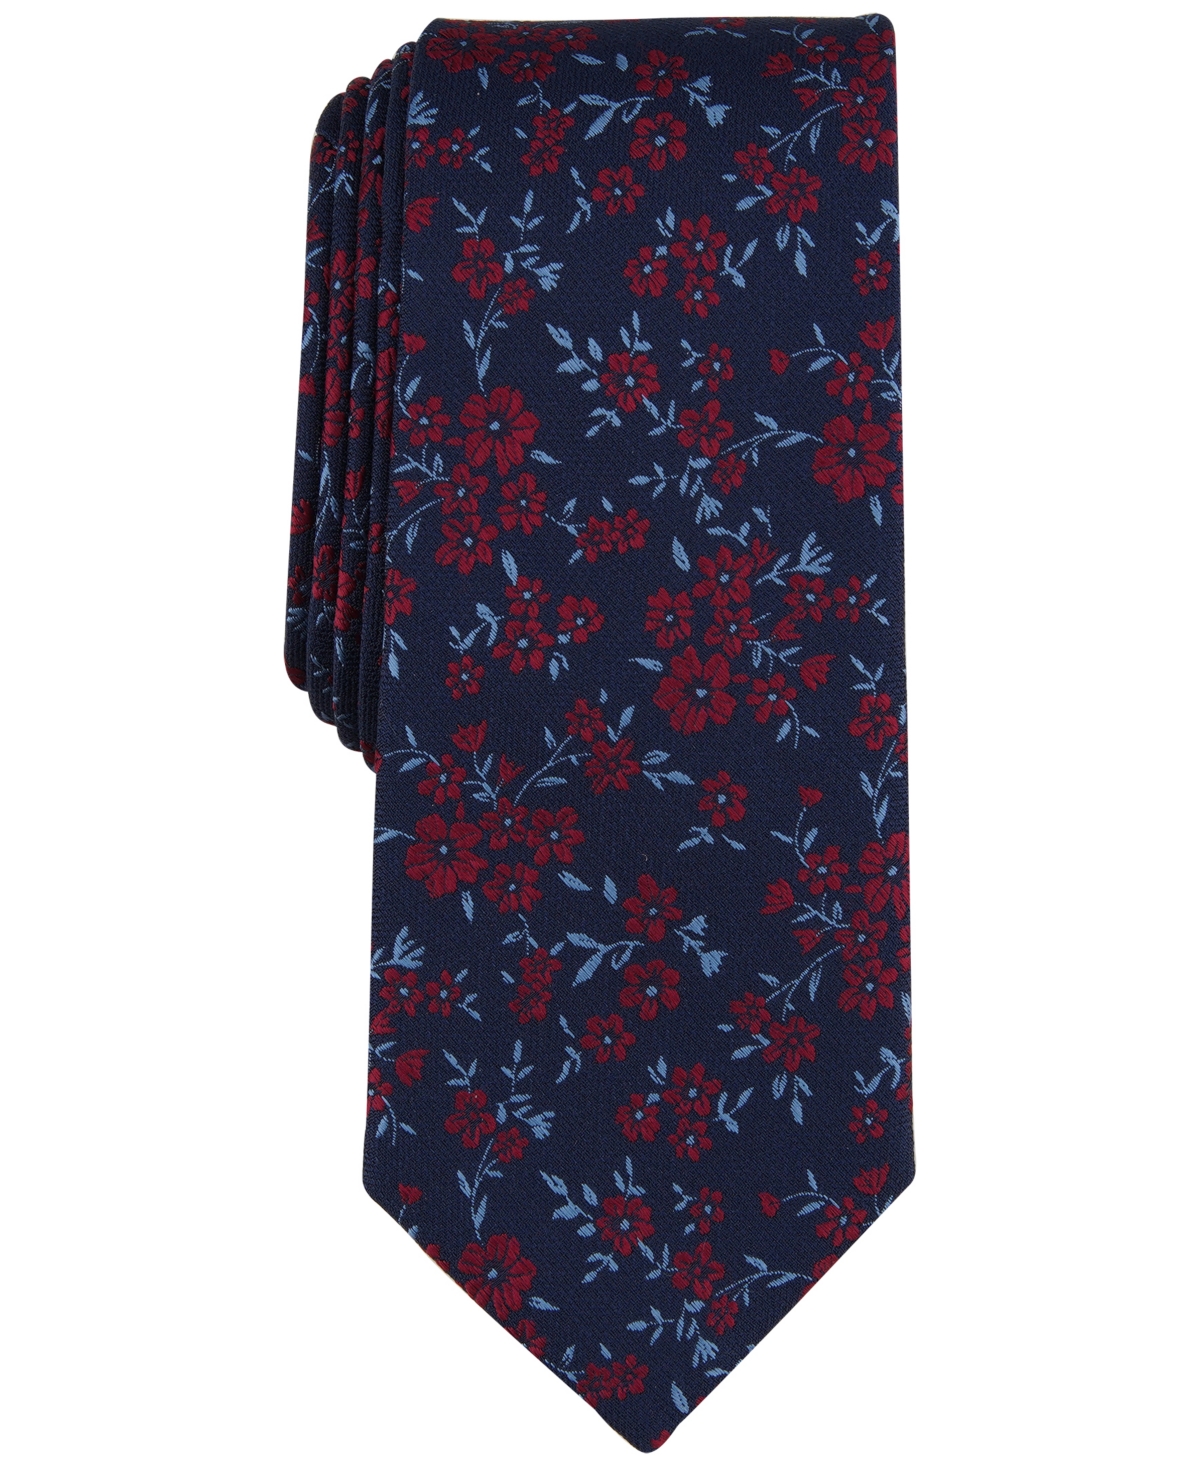 Men's Kelso Floral Tie, Created for Macy's - Burgundy